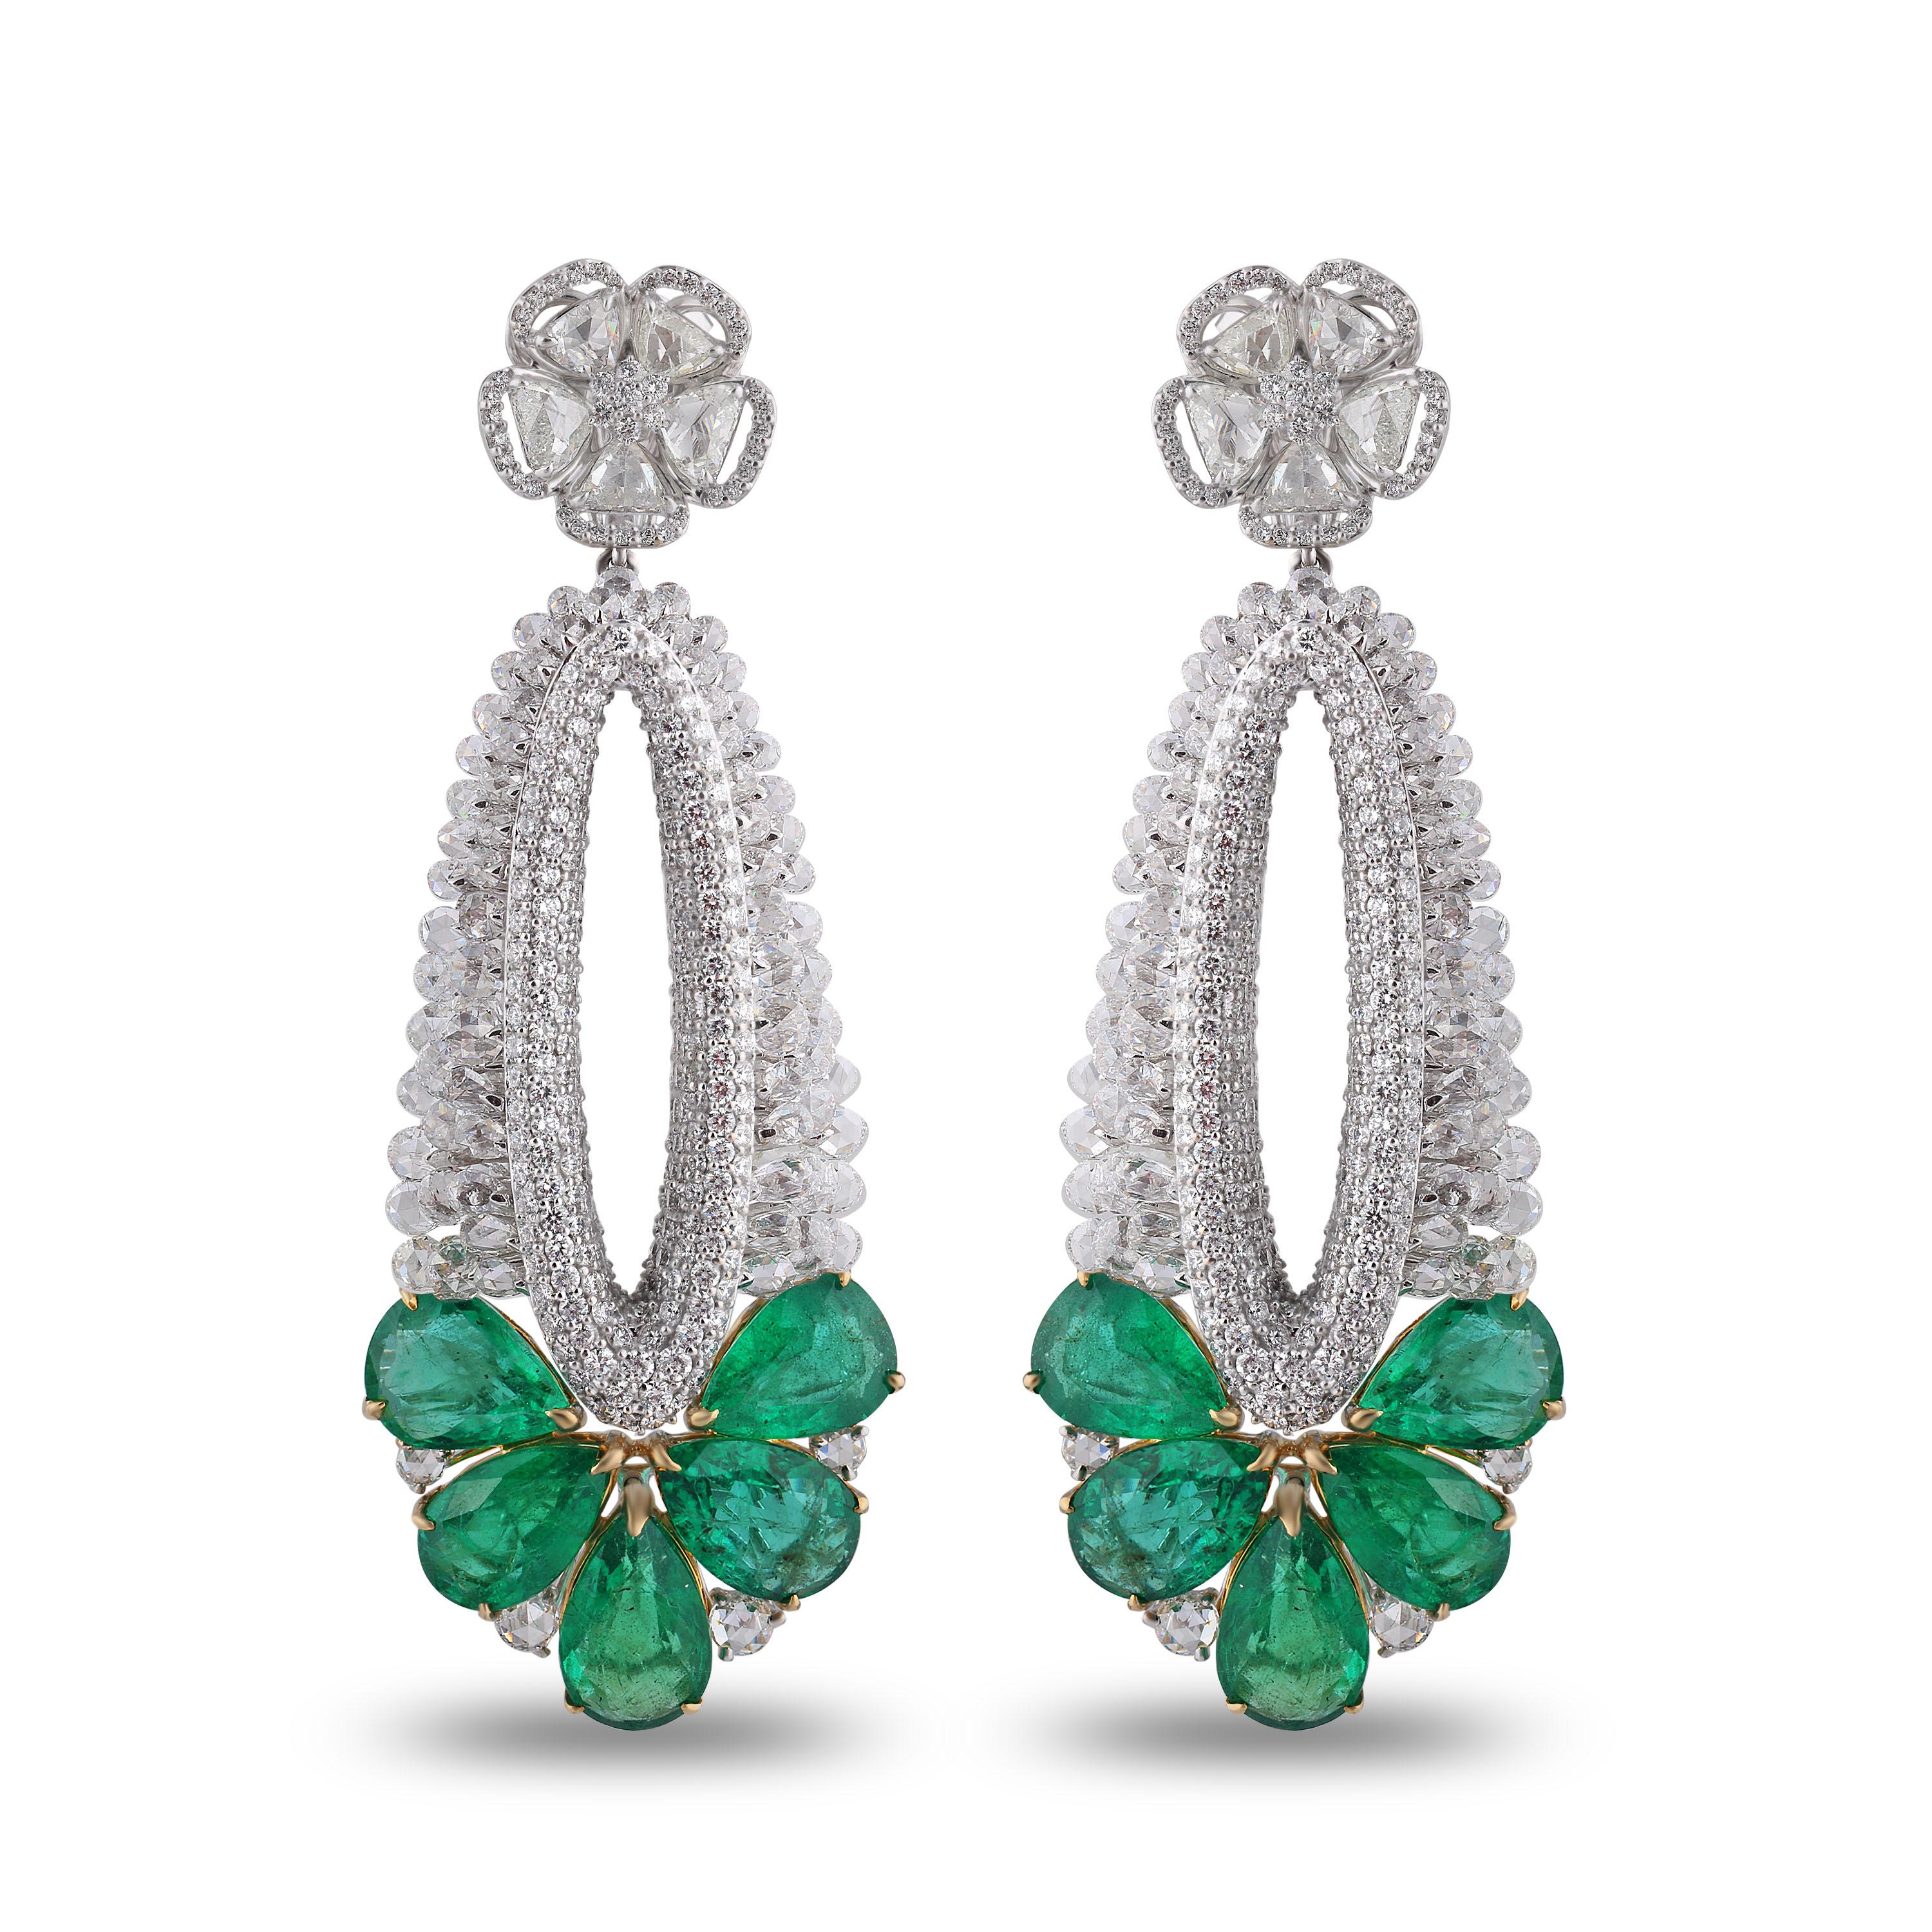 The contrast of the vivid emeralds with luminous rose cut diamonds and brilliant cut diamonds lend these danglers a glorious afterglow. The earrings are made in 18K white gold base with handpicked diamonds and emeralds in a blend of pavé, prong and